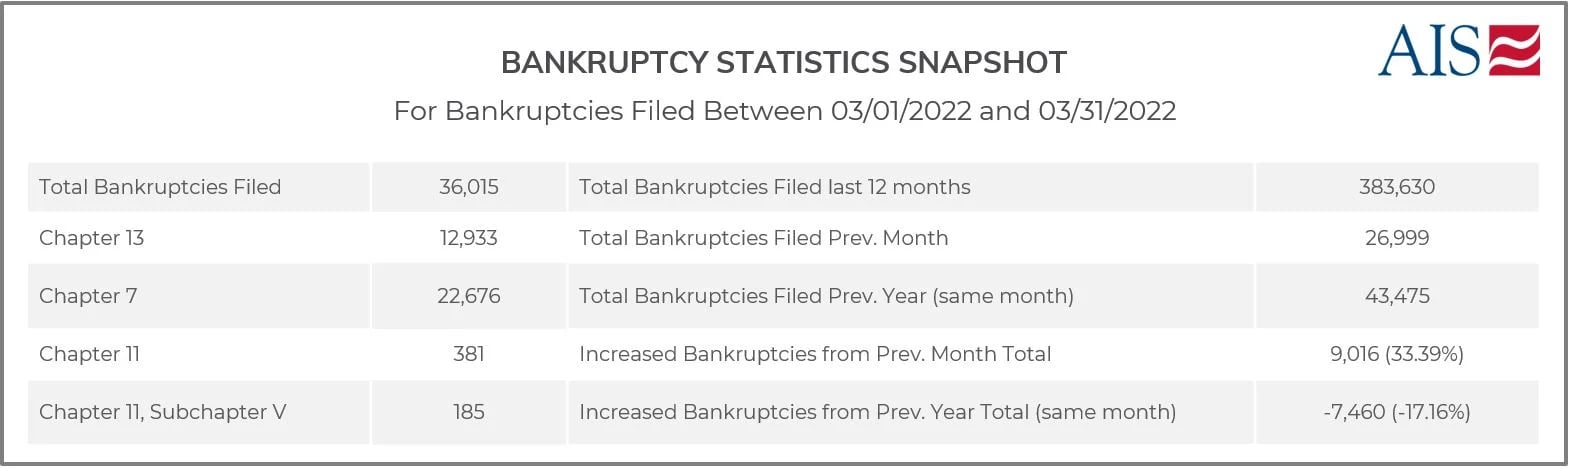 MARCH 2022_BANKRUPTCY STATISTICS SNAPSHOT (TABLE)